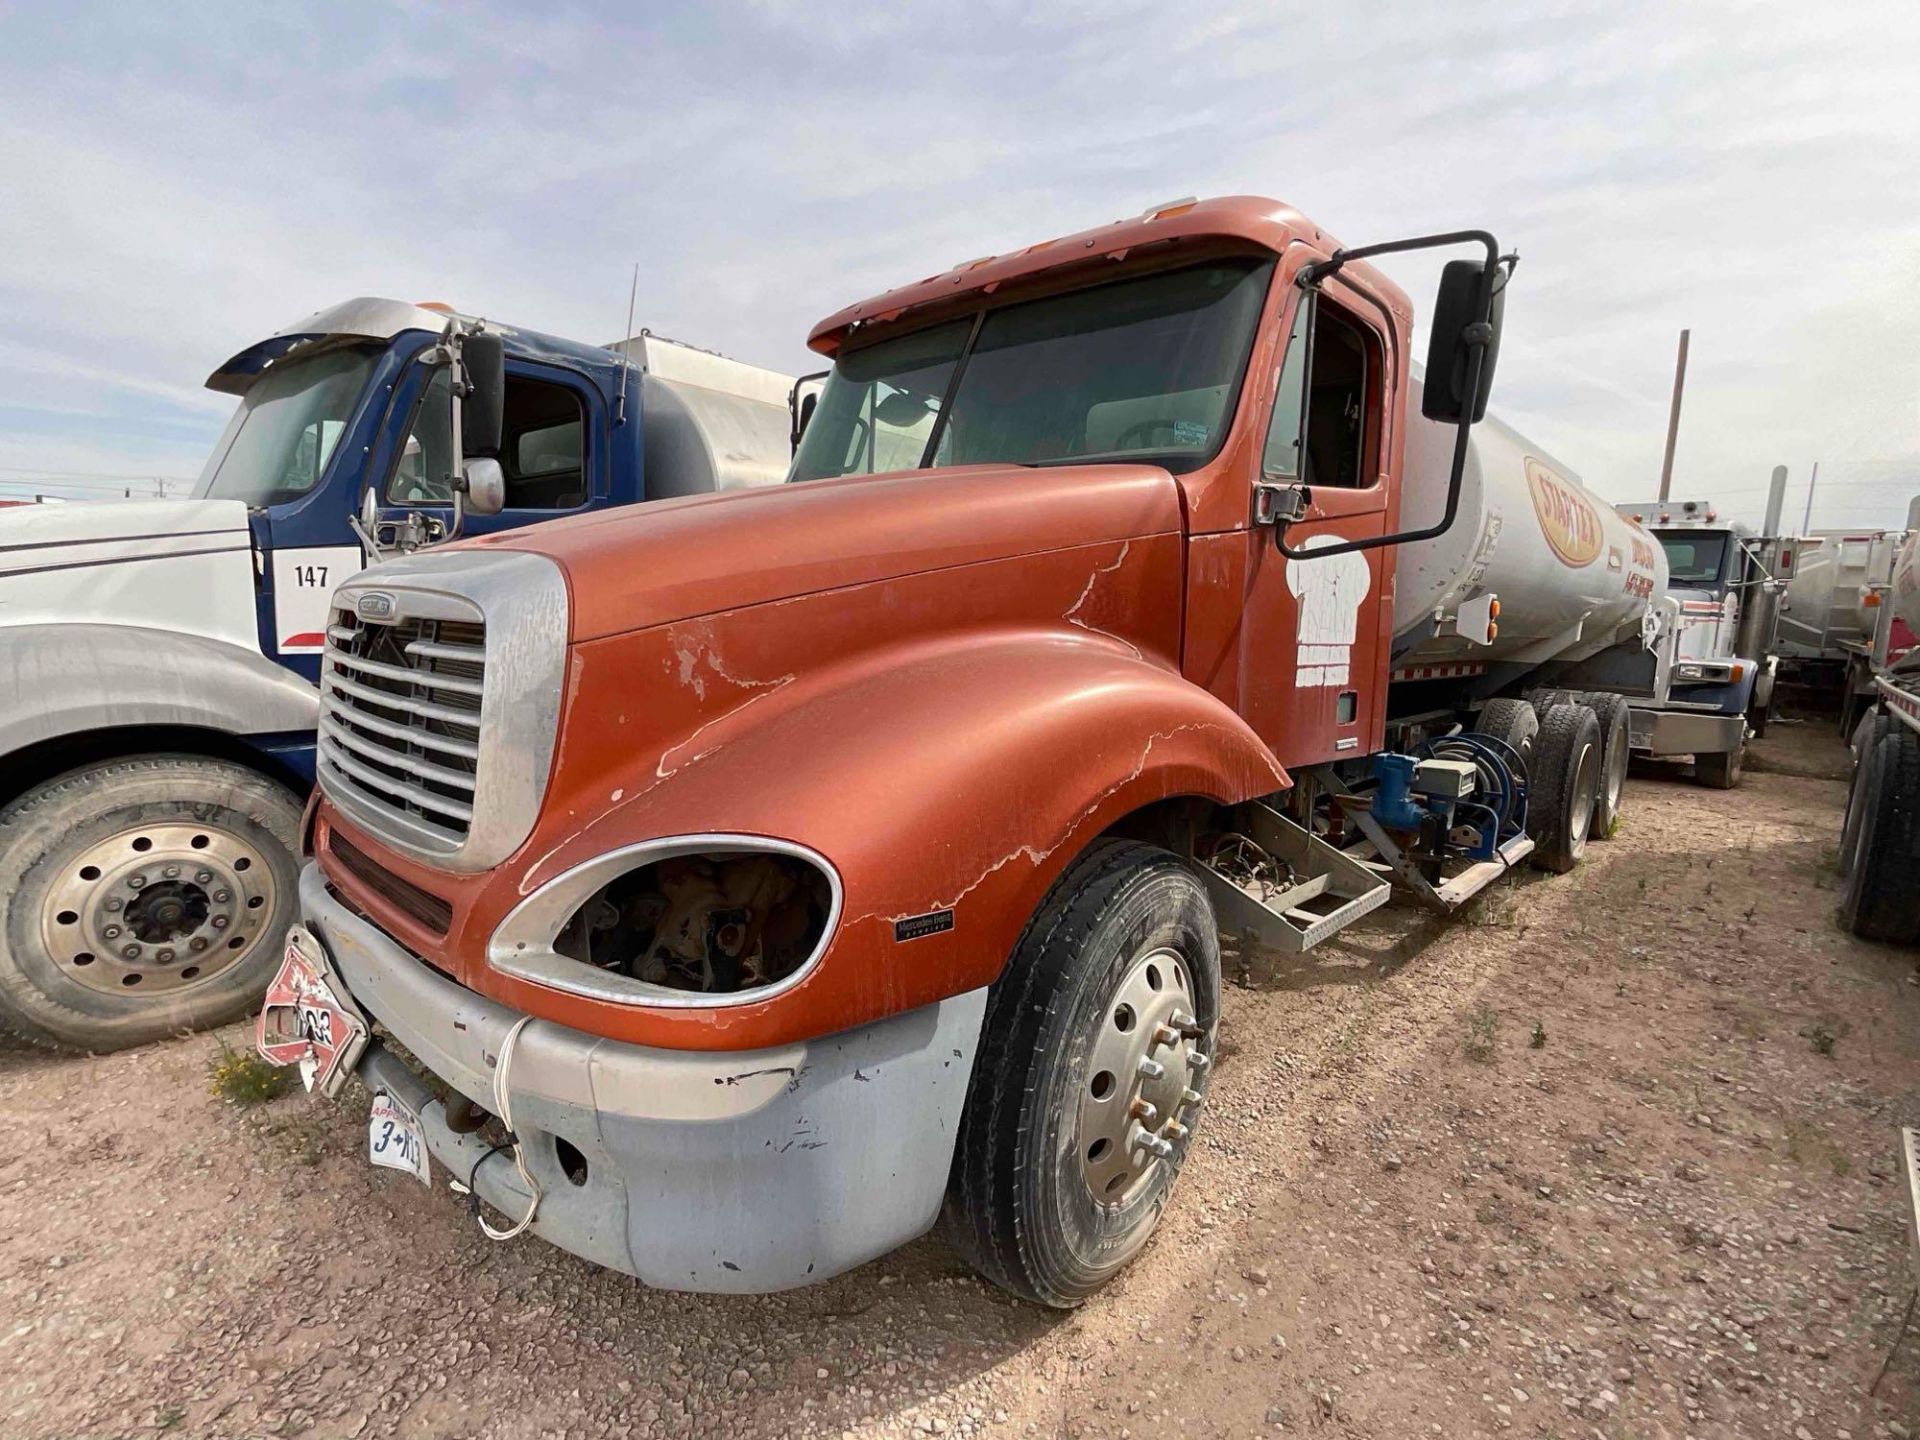 2005 Freightliner Columbia T/A Fuel Truck - Image 2 of 28